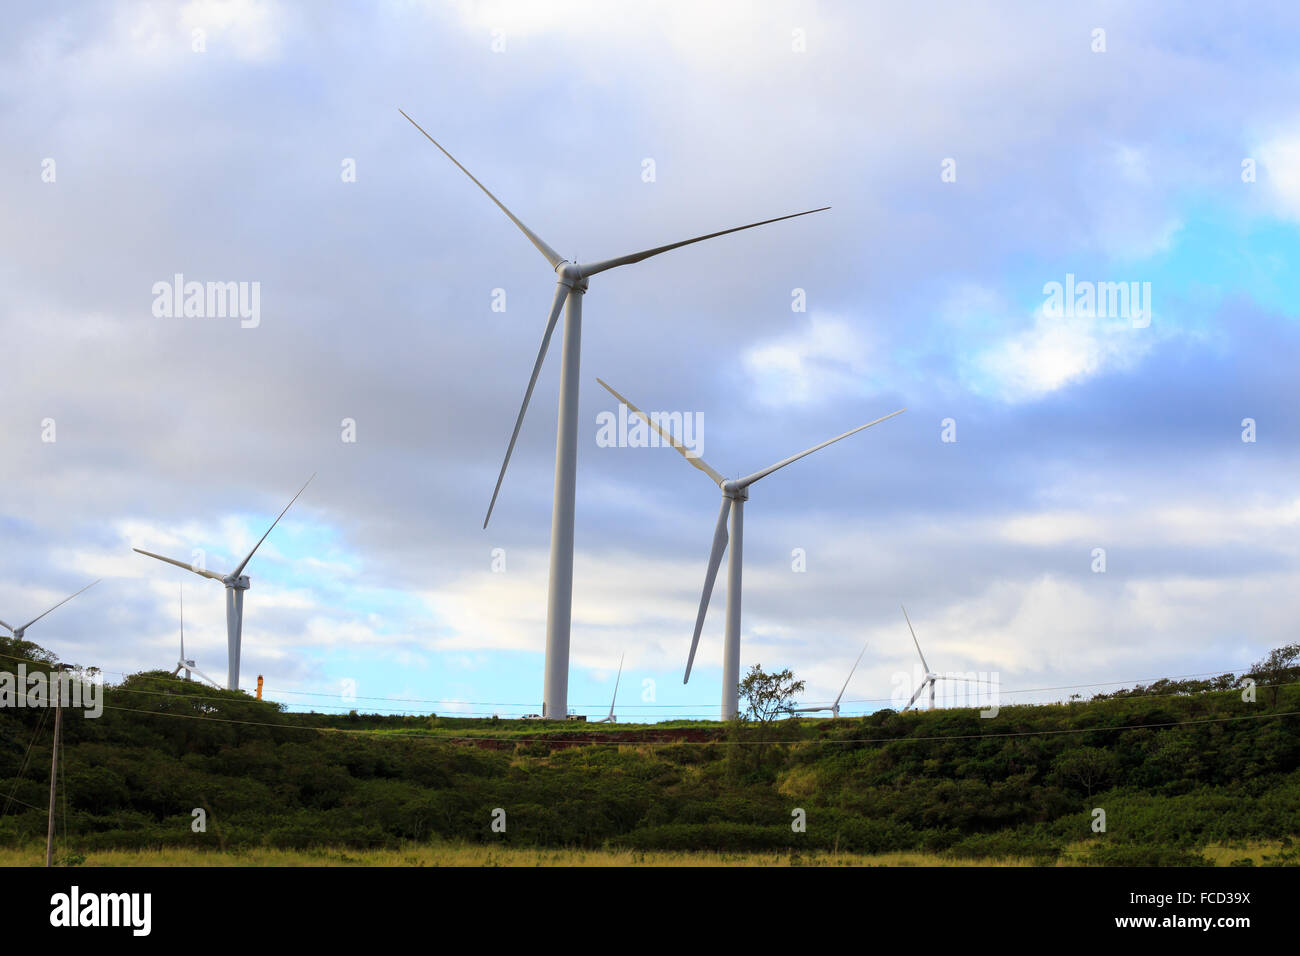 Green energy is stored up at this massive wind farm where turbines line the hills in Oahu Hawaii. Sustainable, renewable energy. Stock Photo